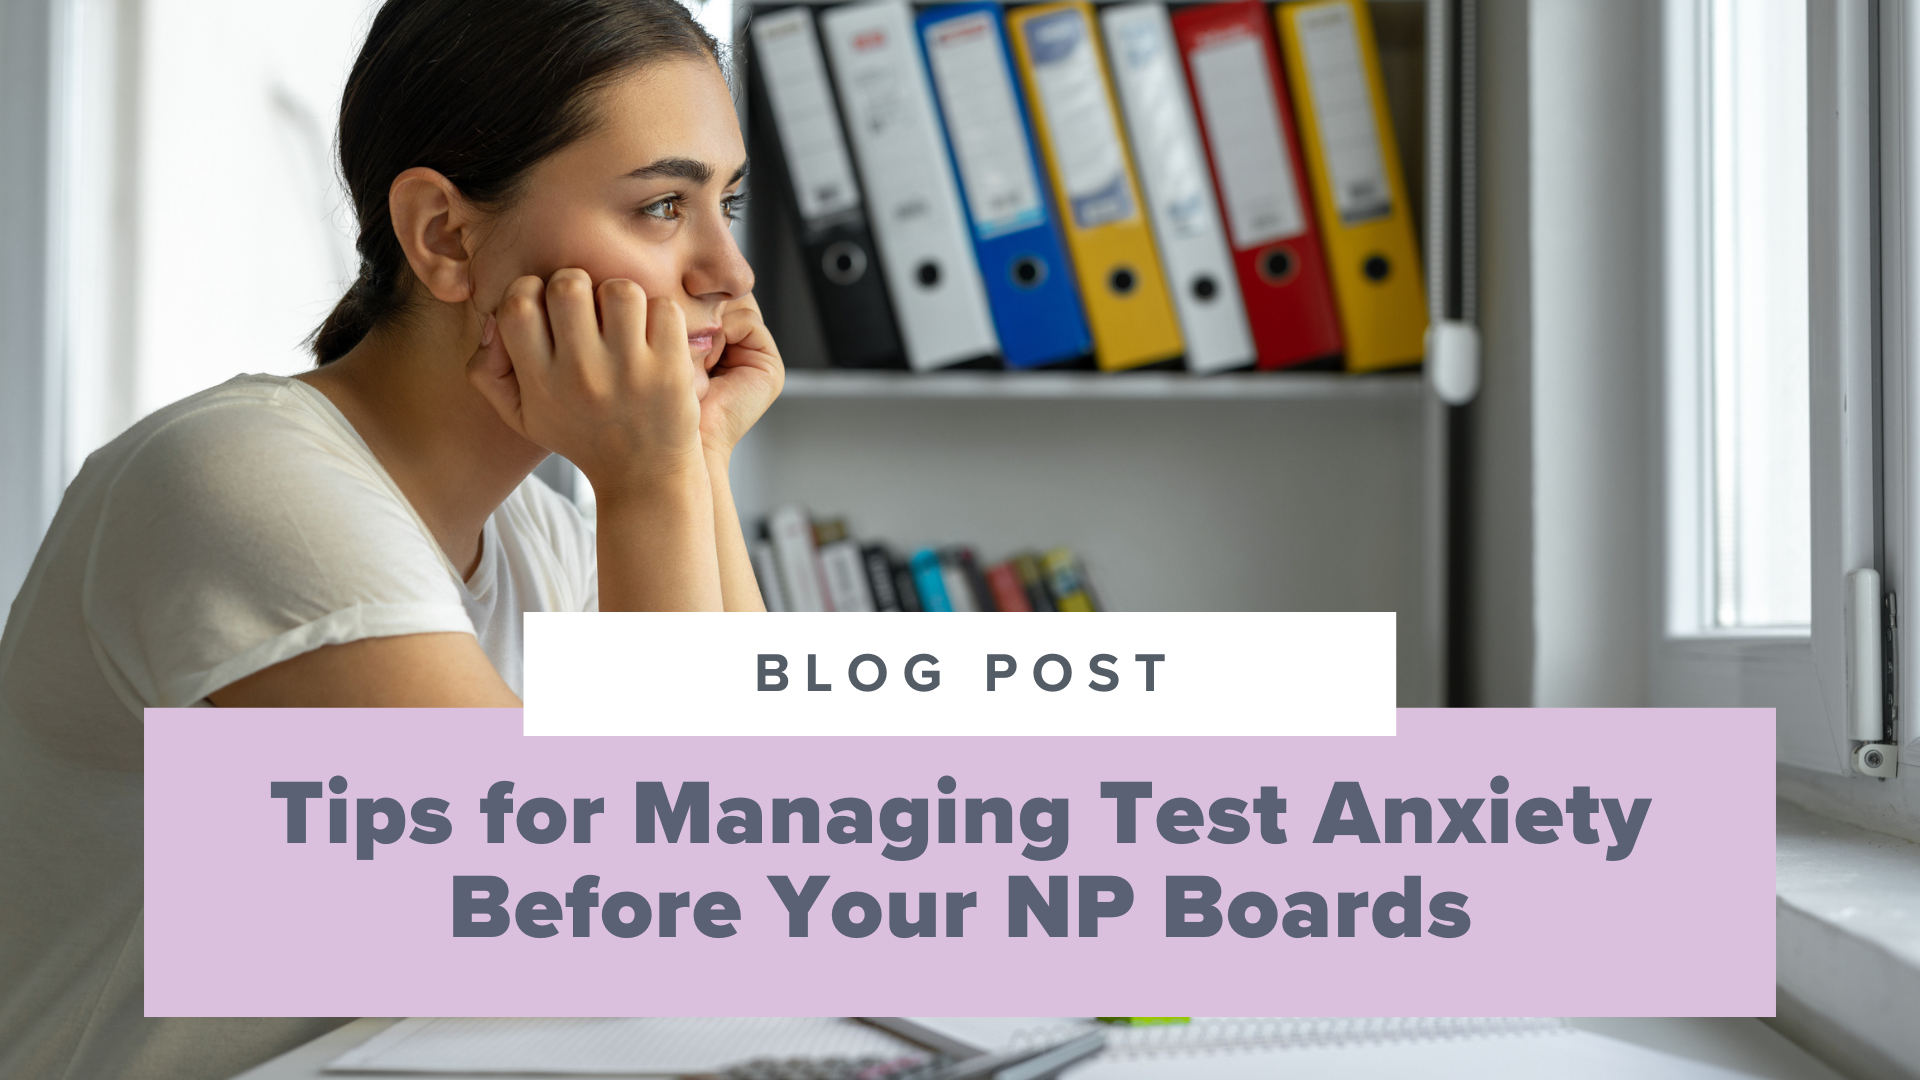 SMNP Blog - Tips for Managing Test Anxiety Before Your NP Boards